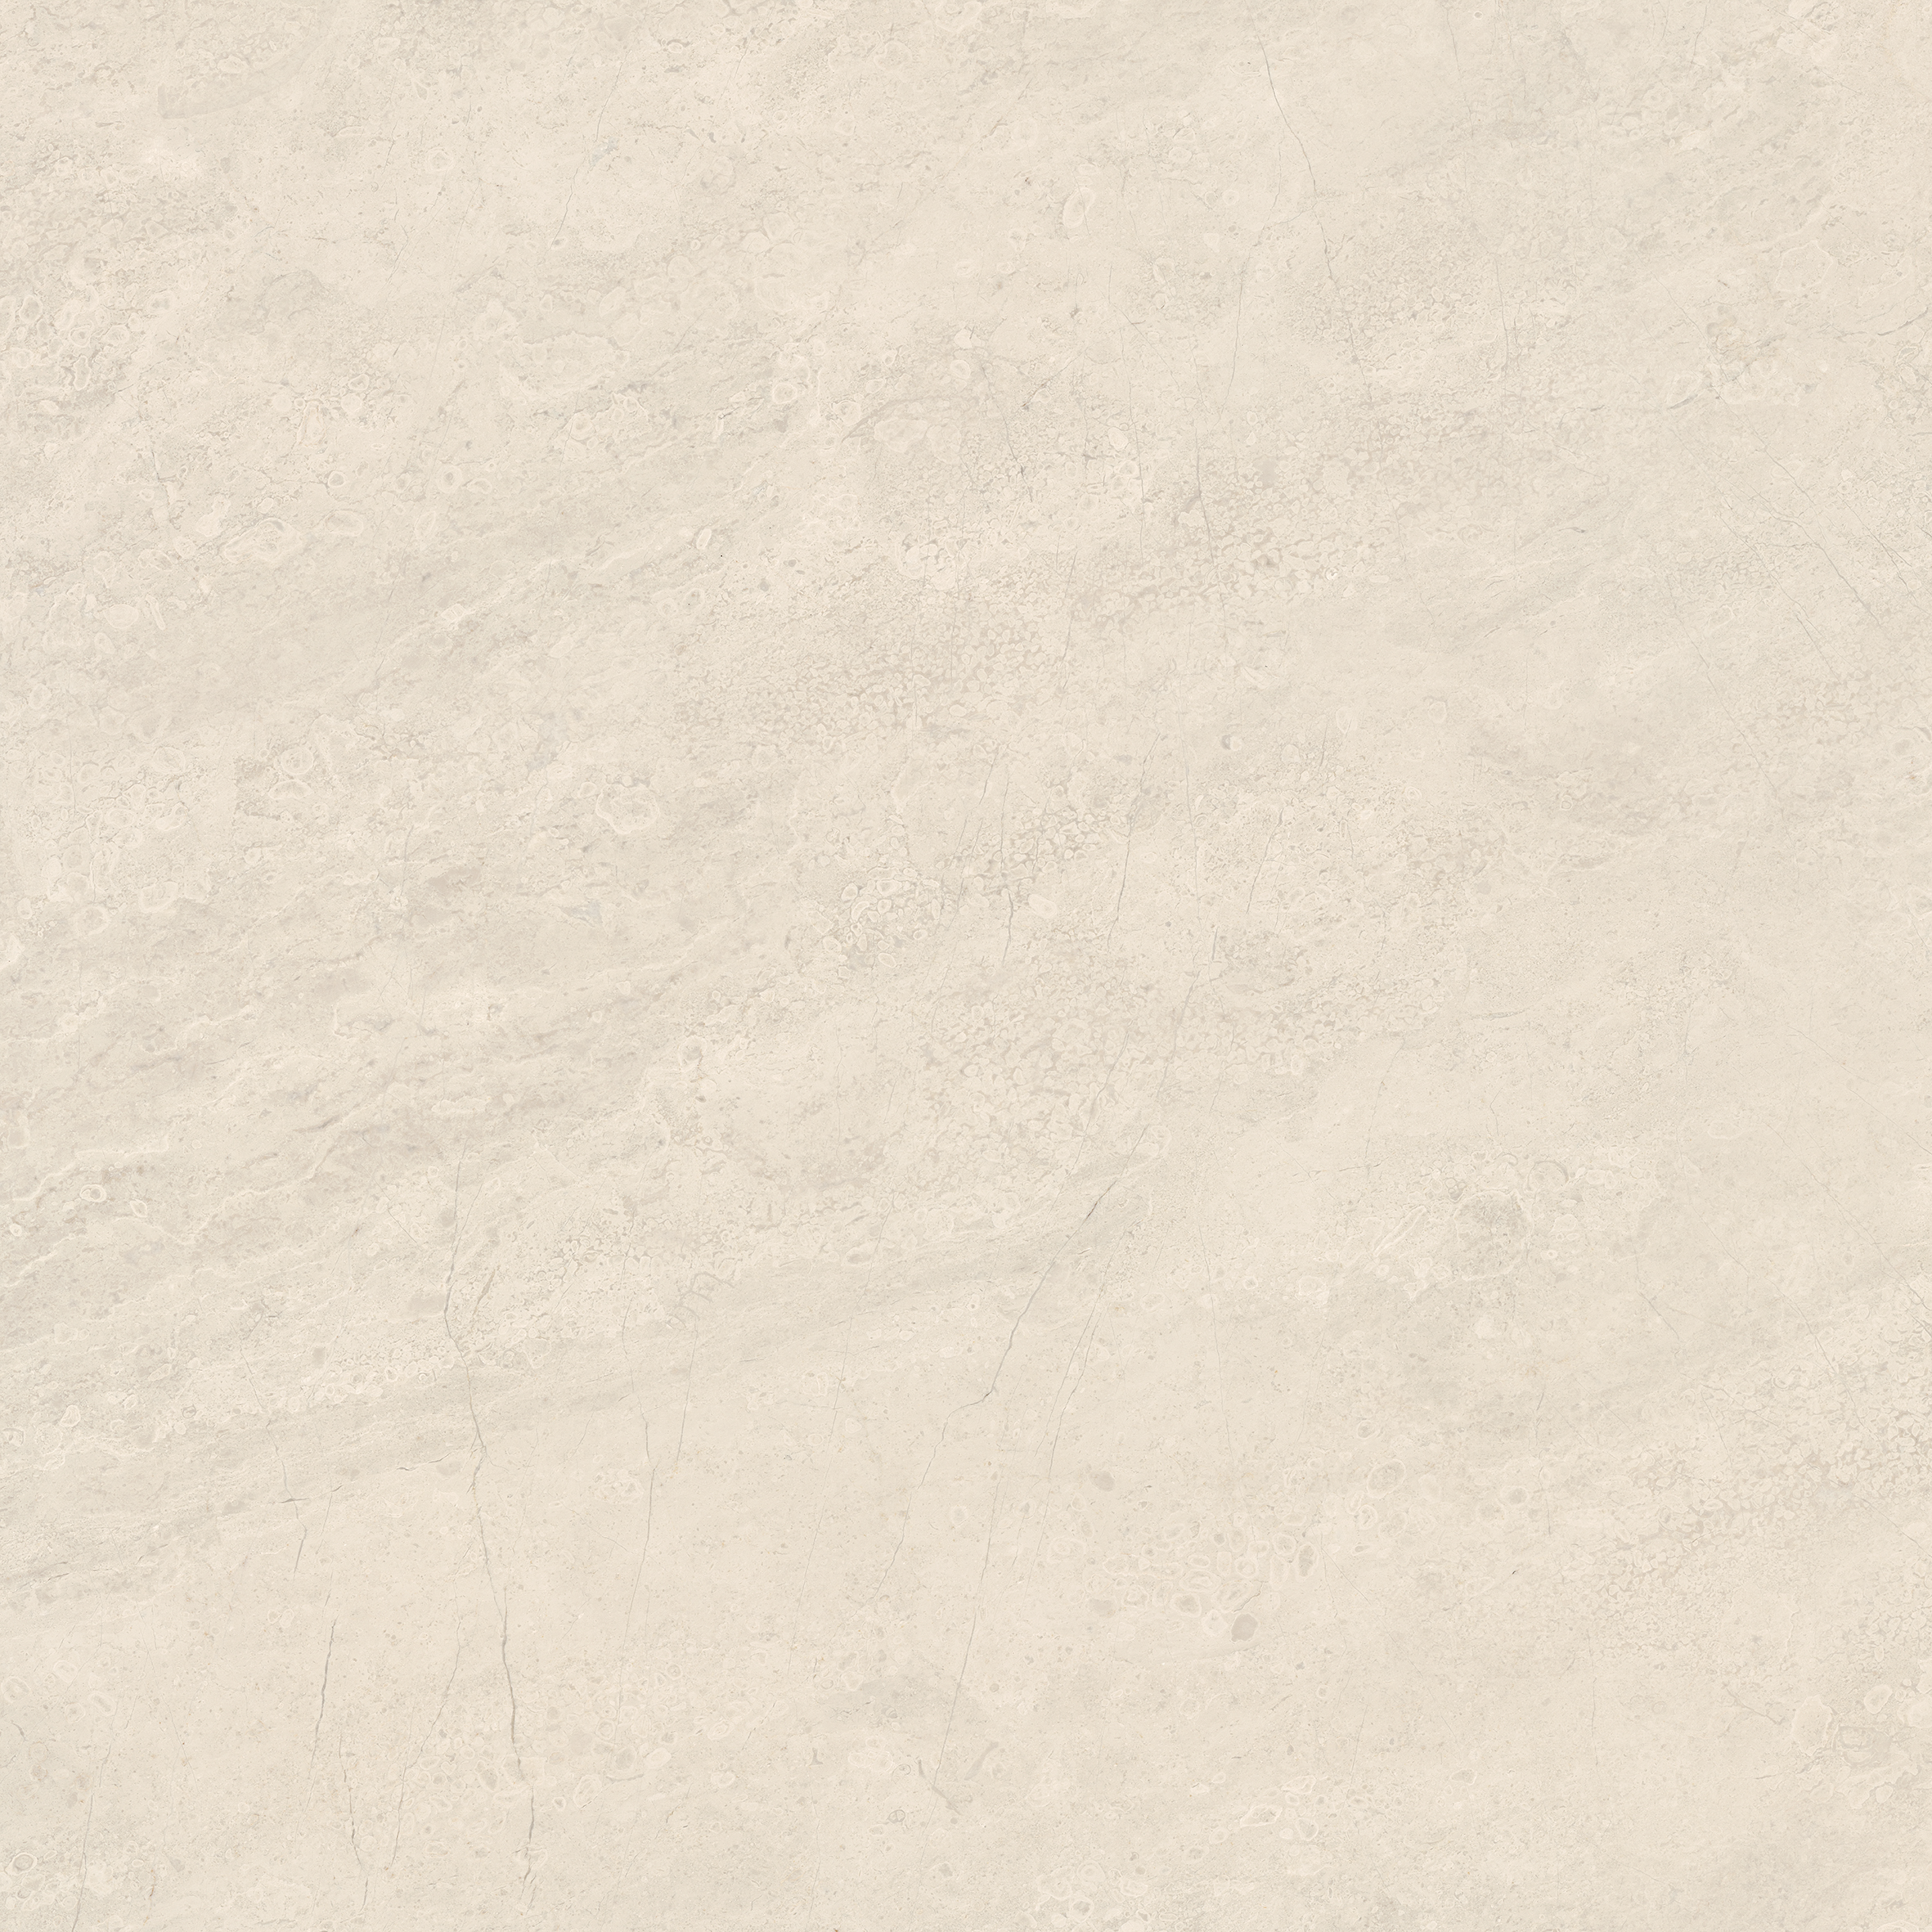 allure ivory pattern glazed porcelain field tile from mayfair anatolia collection distributed by surface group international matte finish rectified edge 24x24 square shape